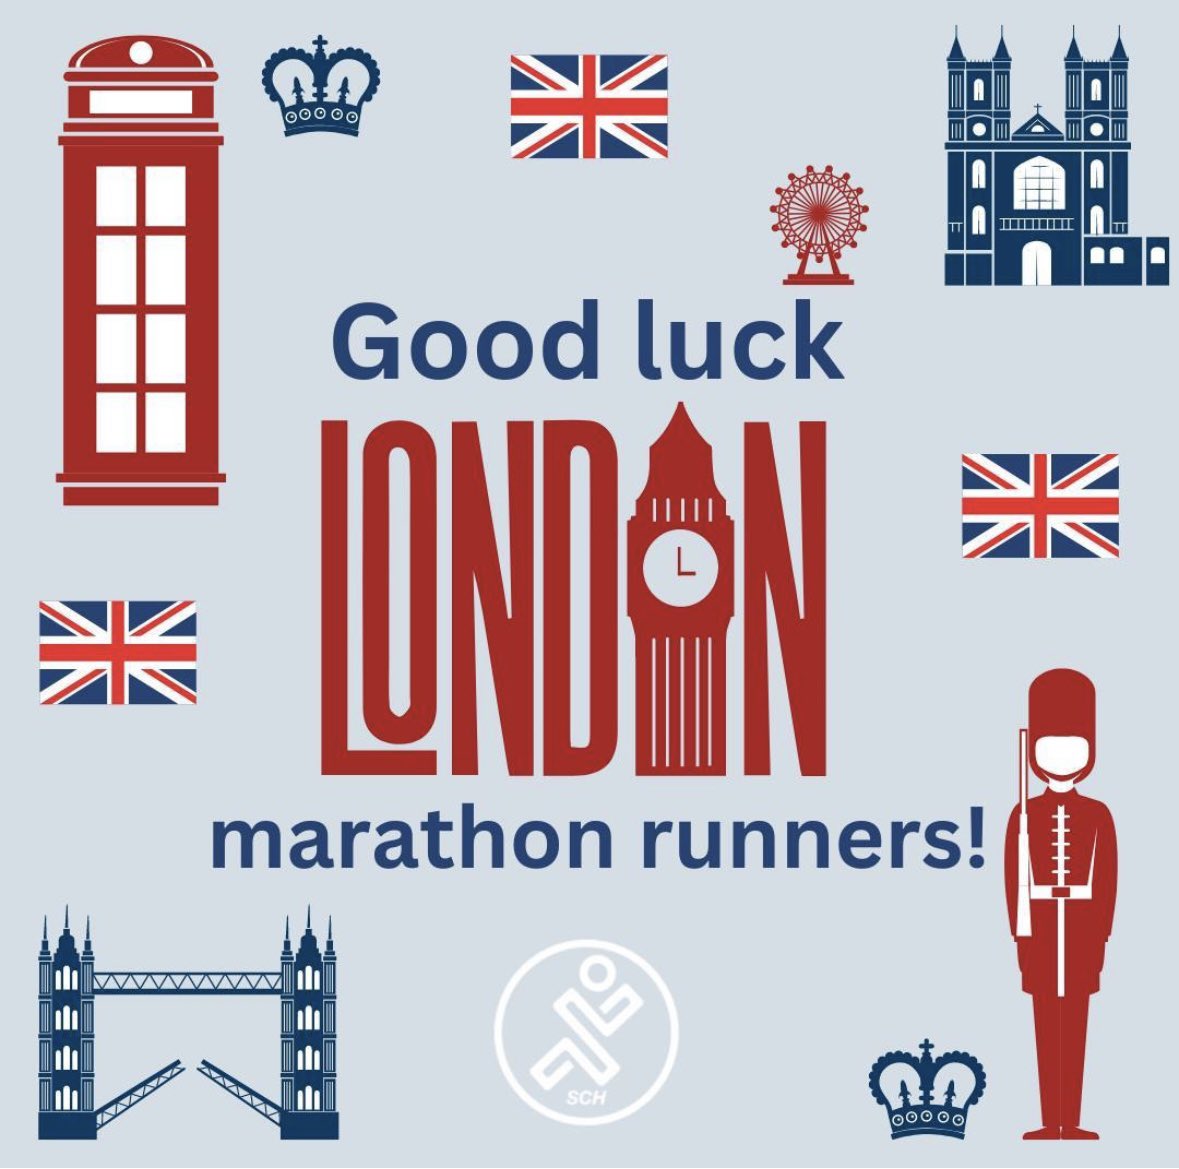 Good luck to all the amazing people running the London marathon today. University of Hertfordshire BSc Sports Therapy students will be providing post event sports massages for the runners of Asthma UK @UniofHertsIoS @LondonMarathon @uniofhertslms